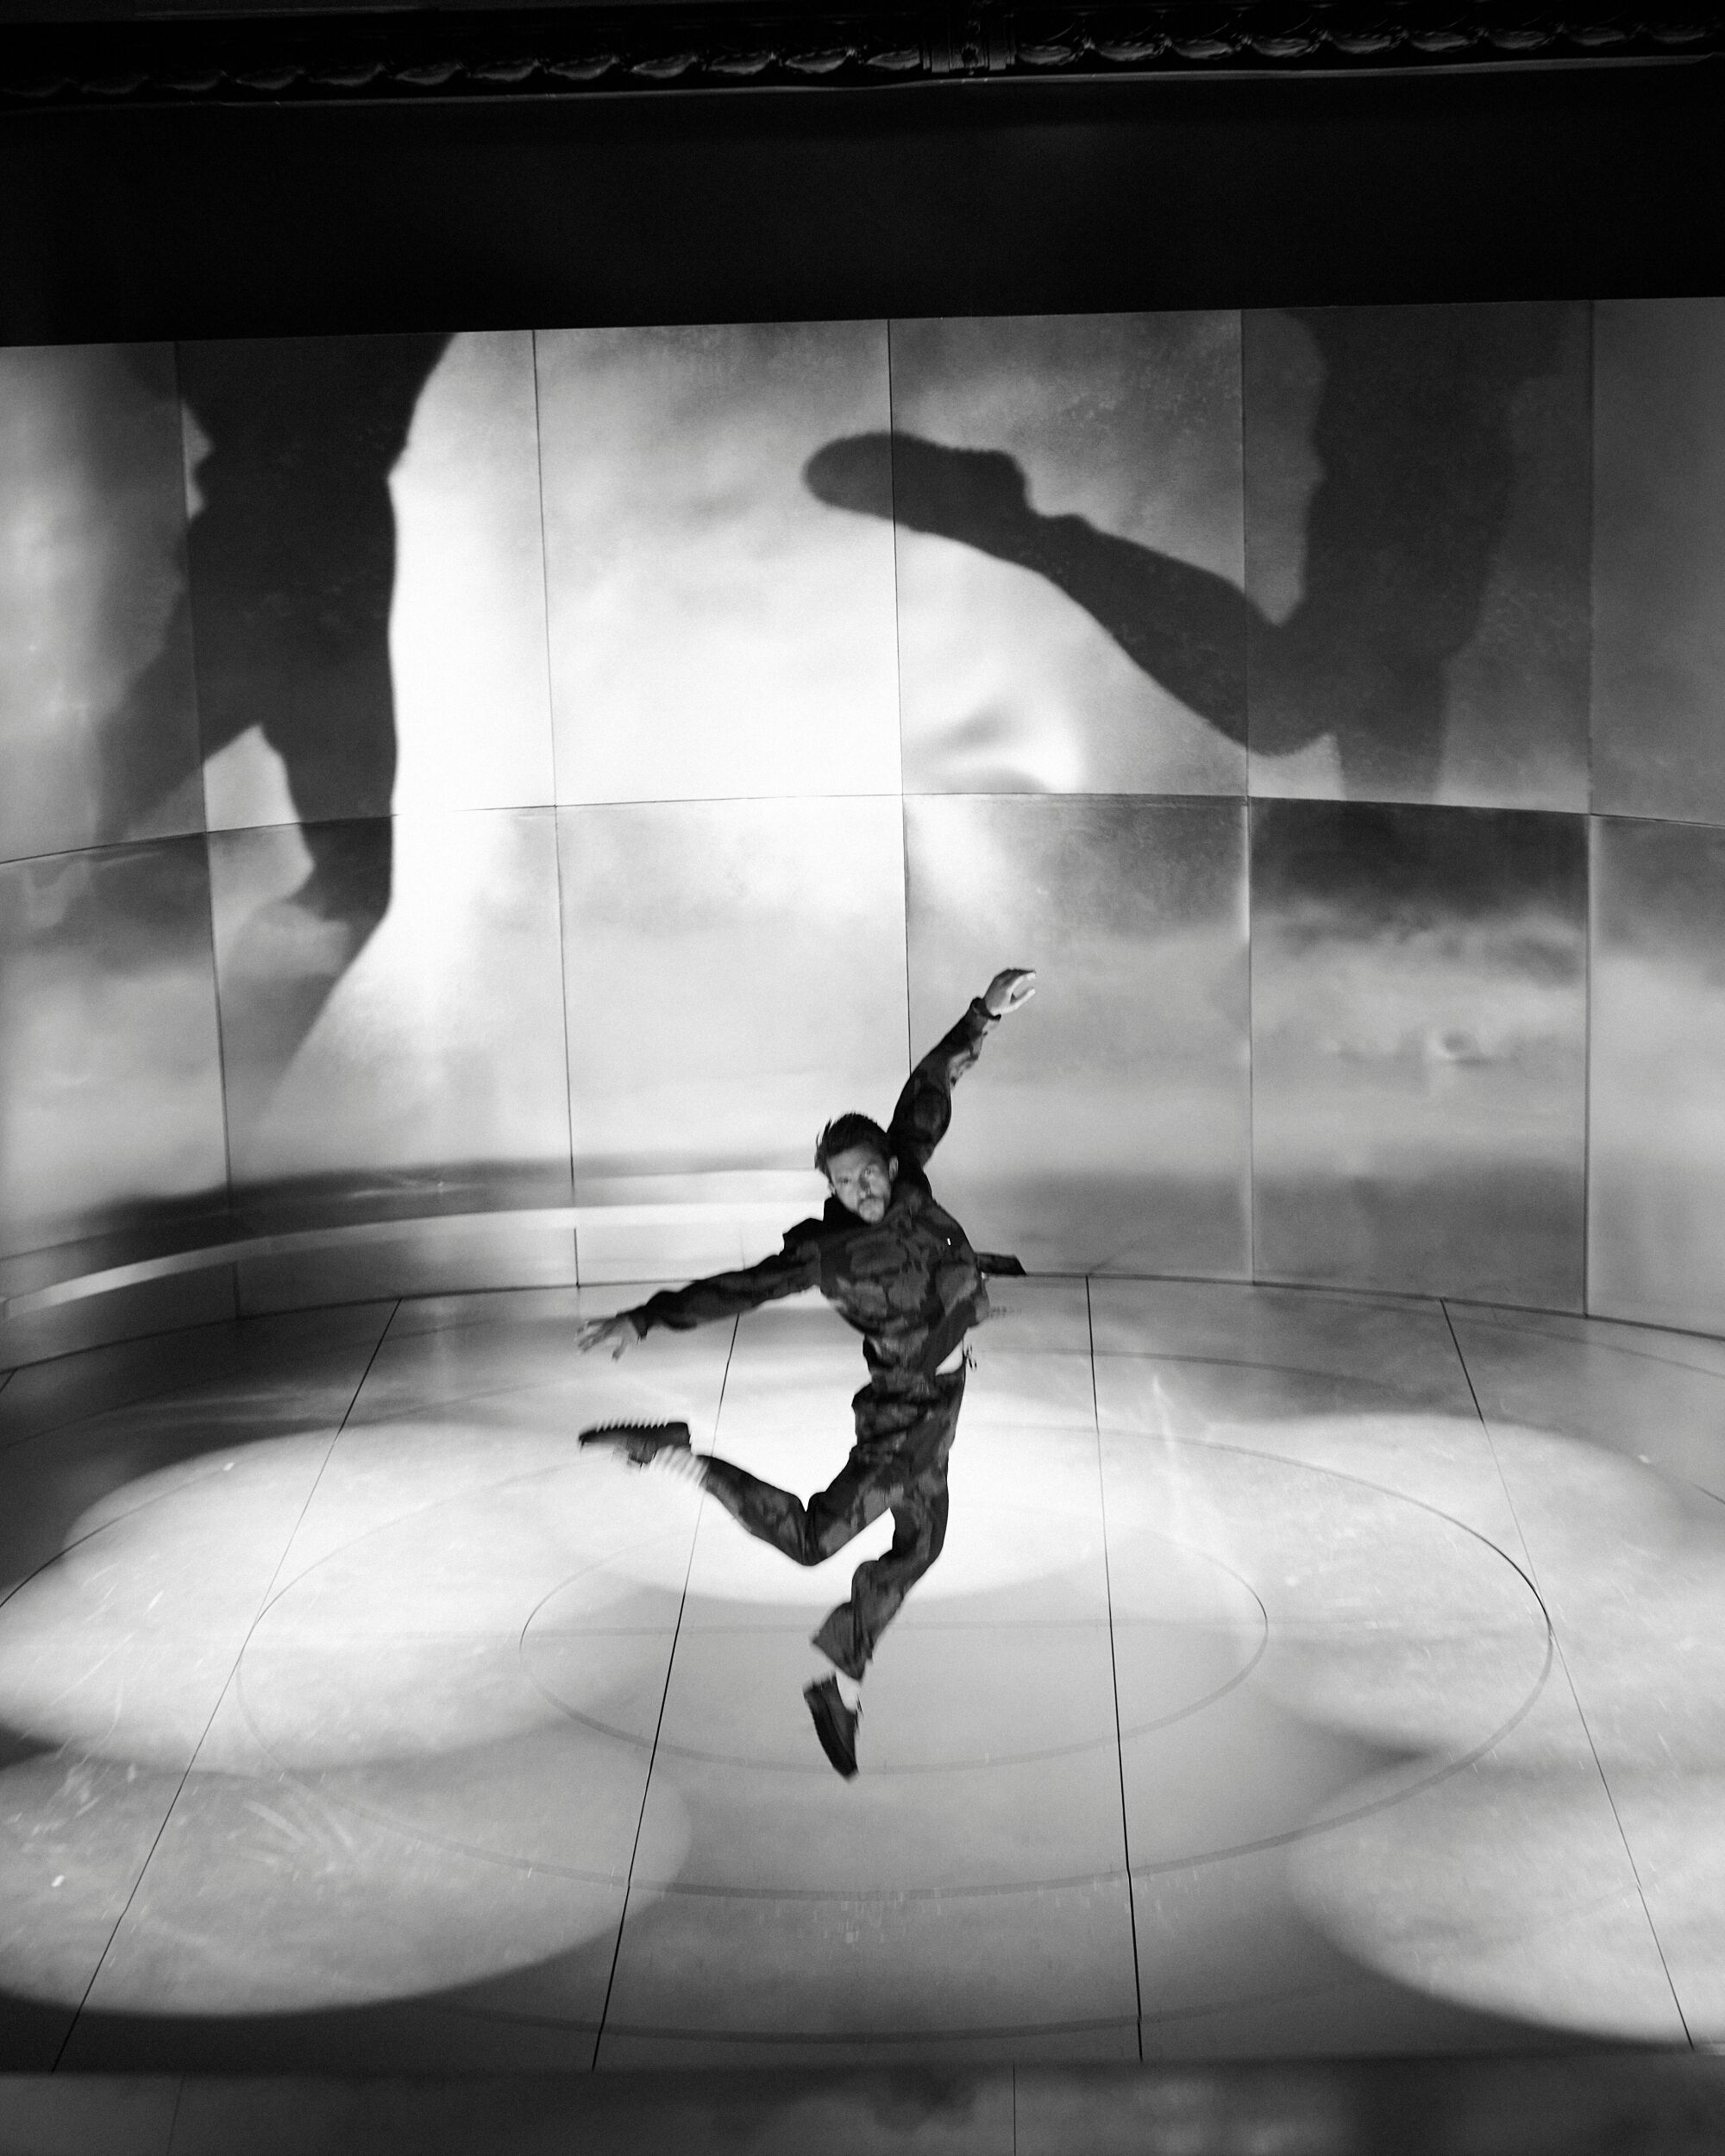 A man dancing on a large stage